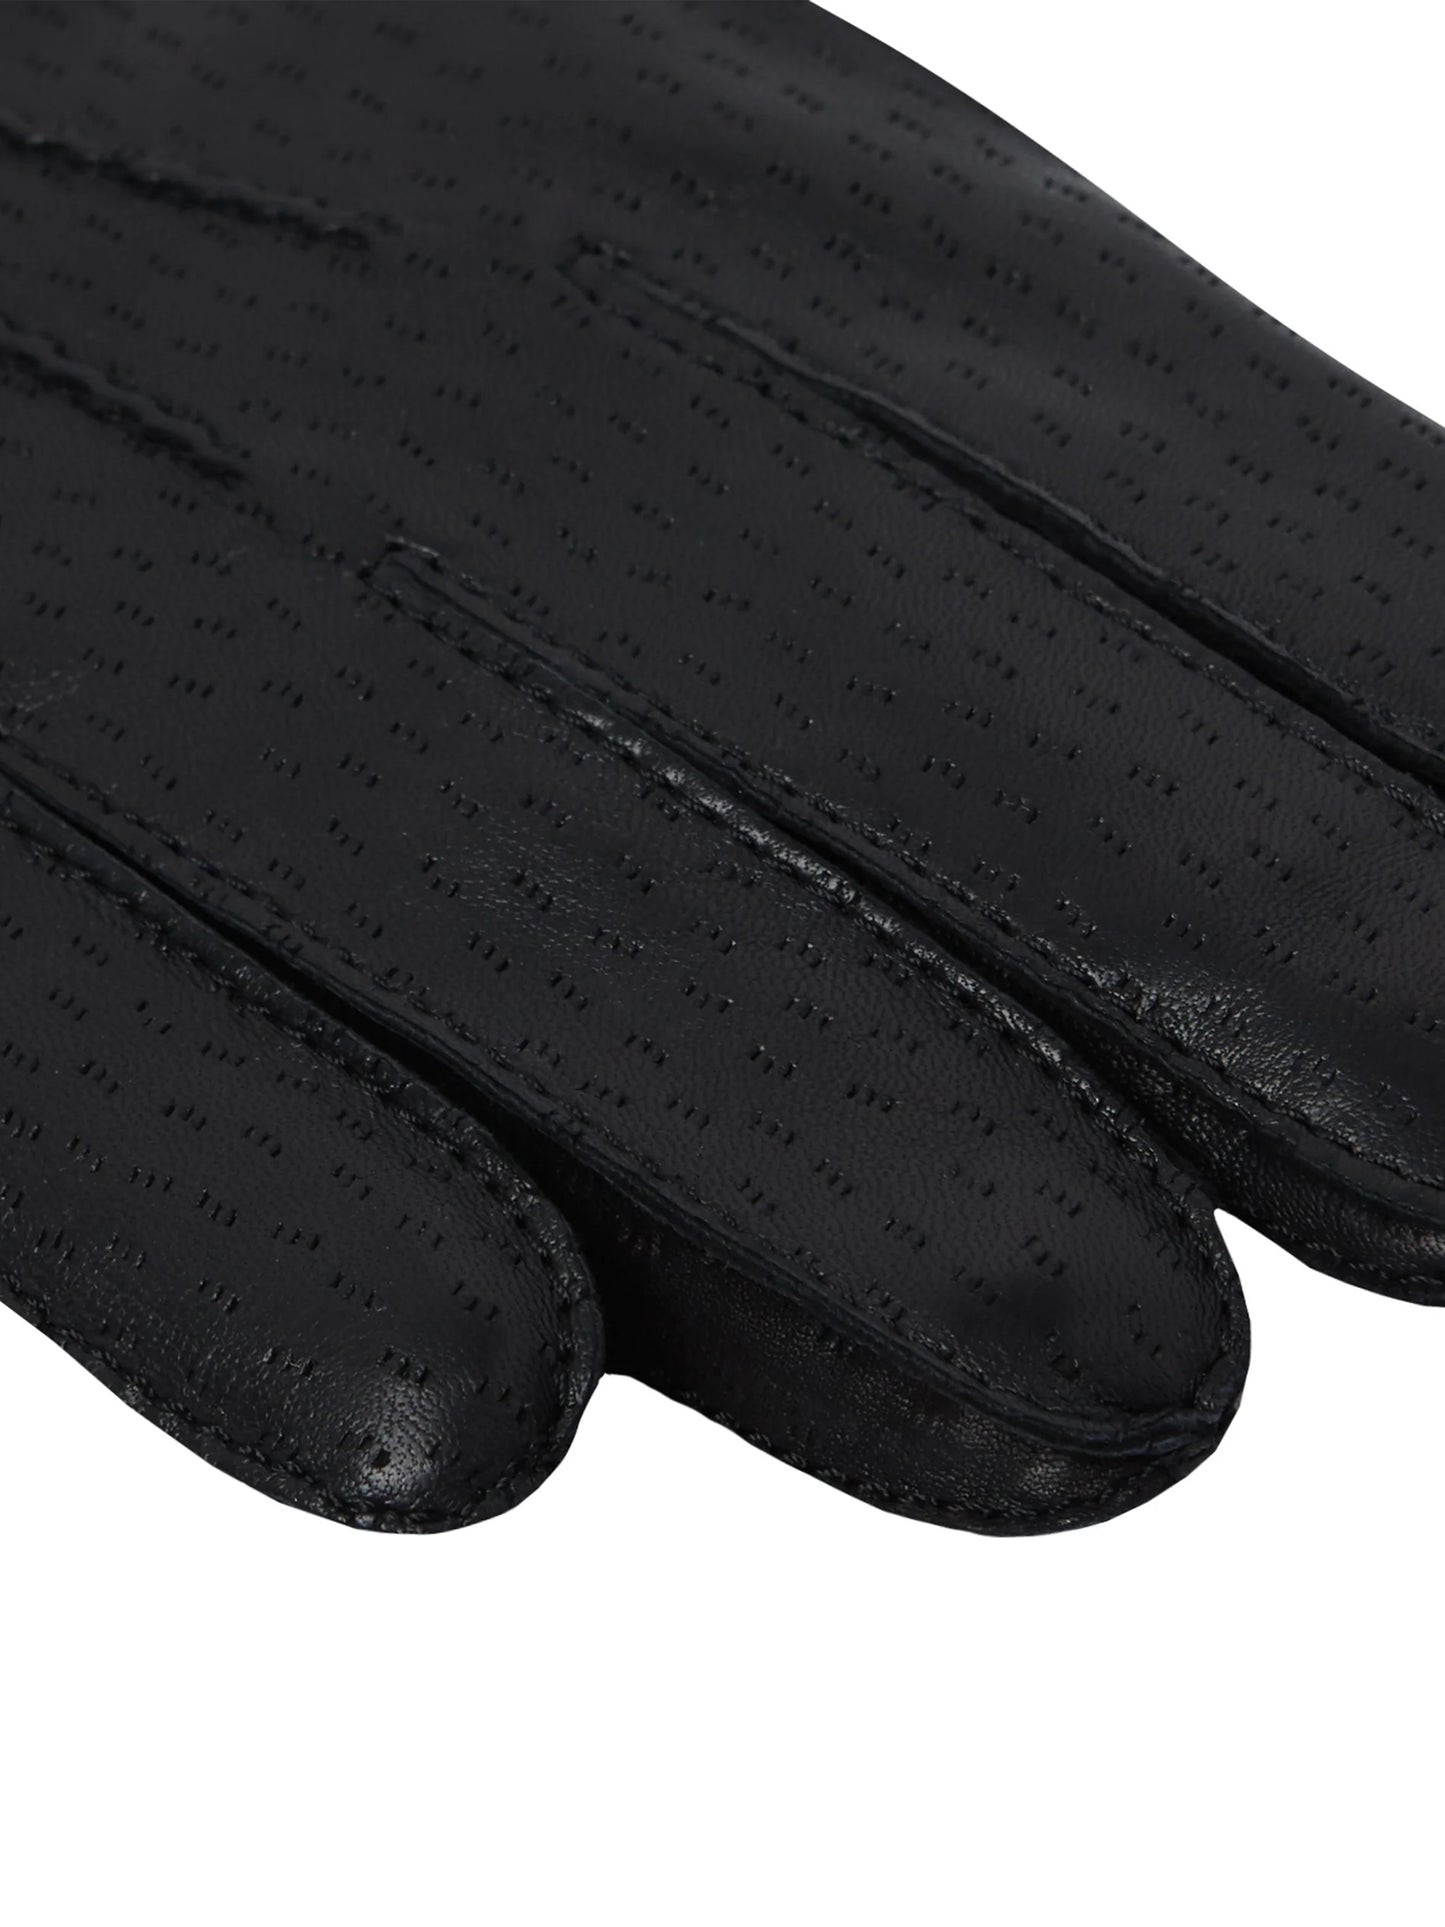 Luxury Textured Leather Black Cashmere-Lined Gloves